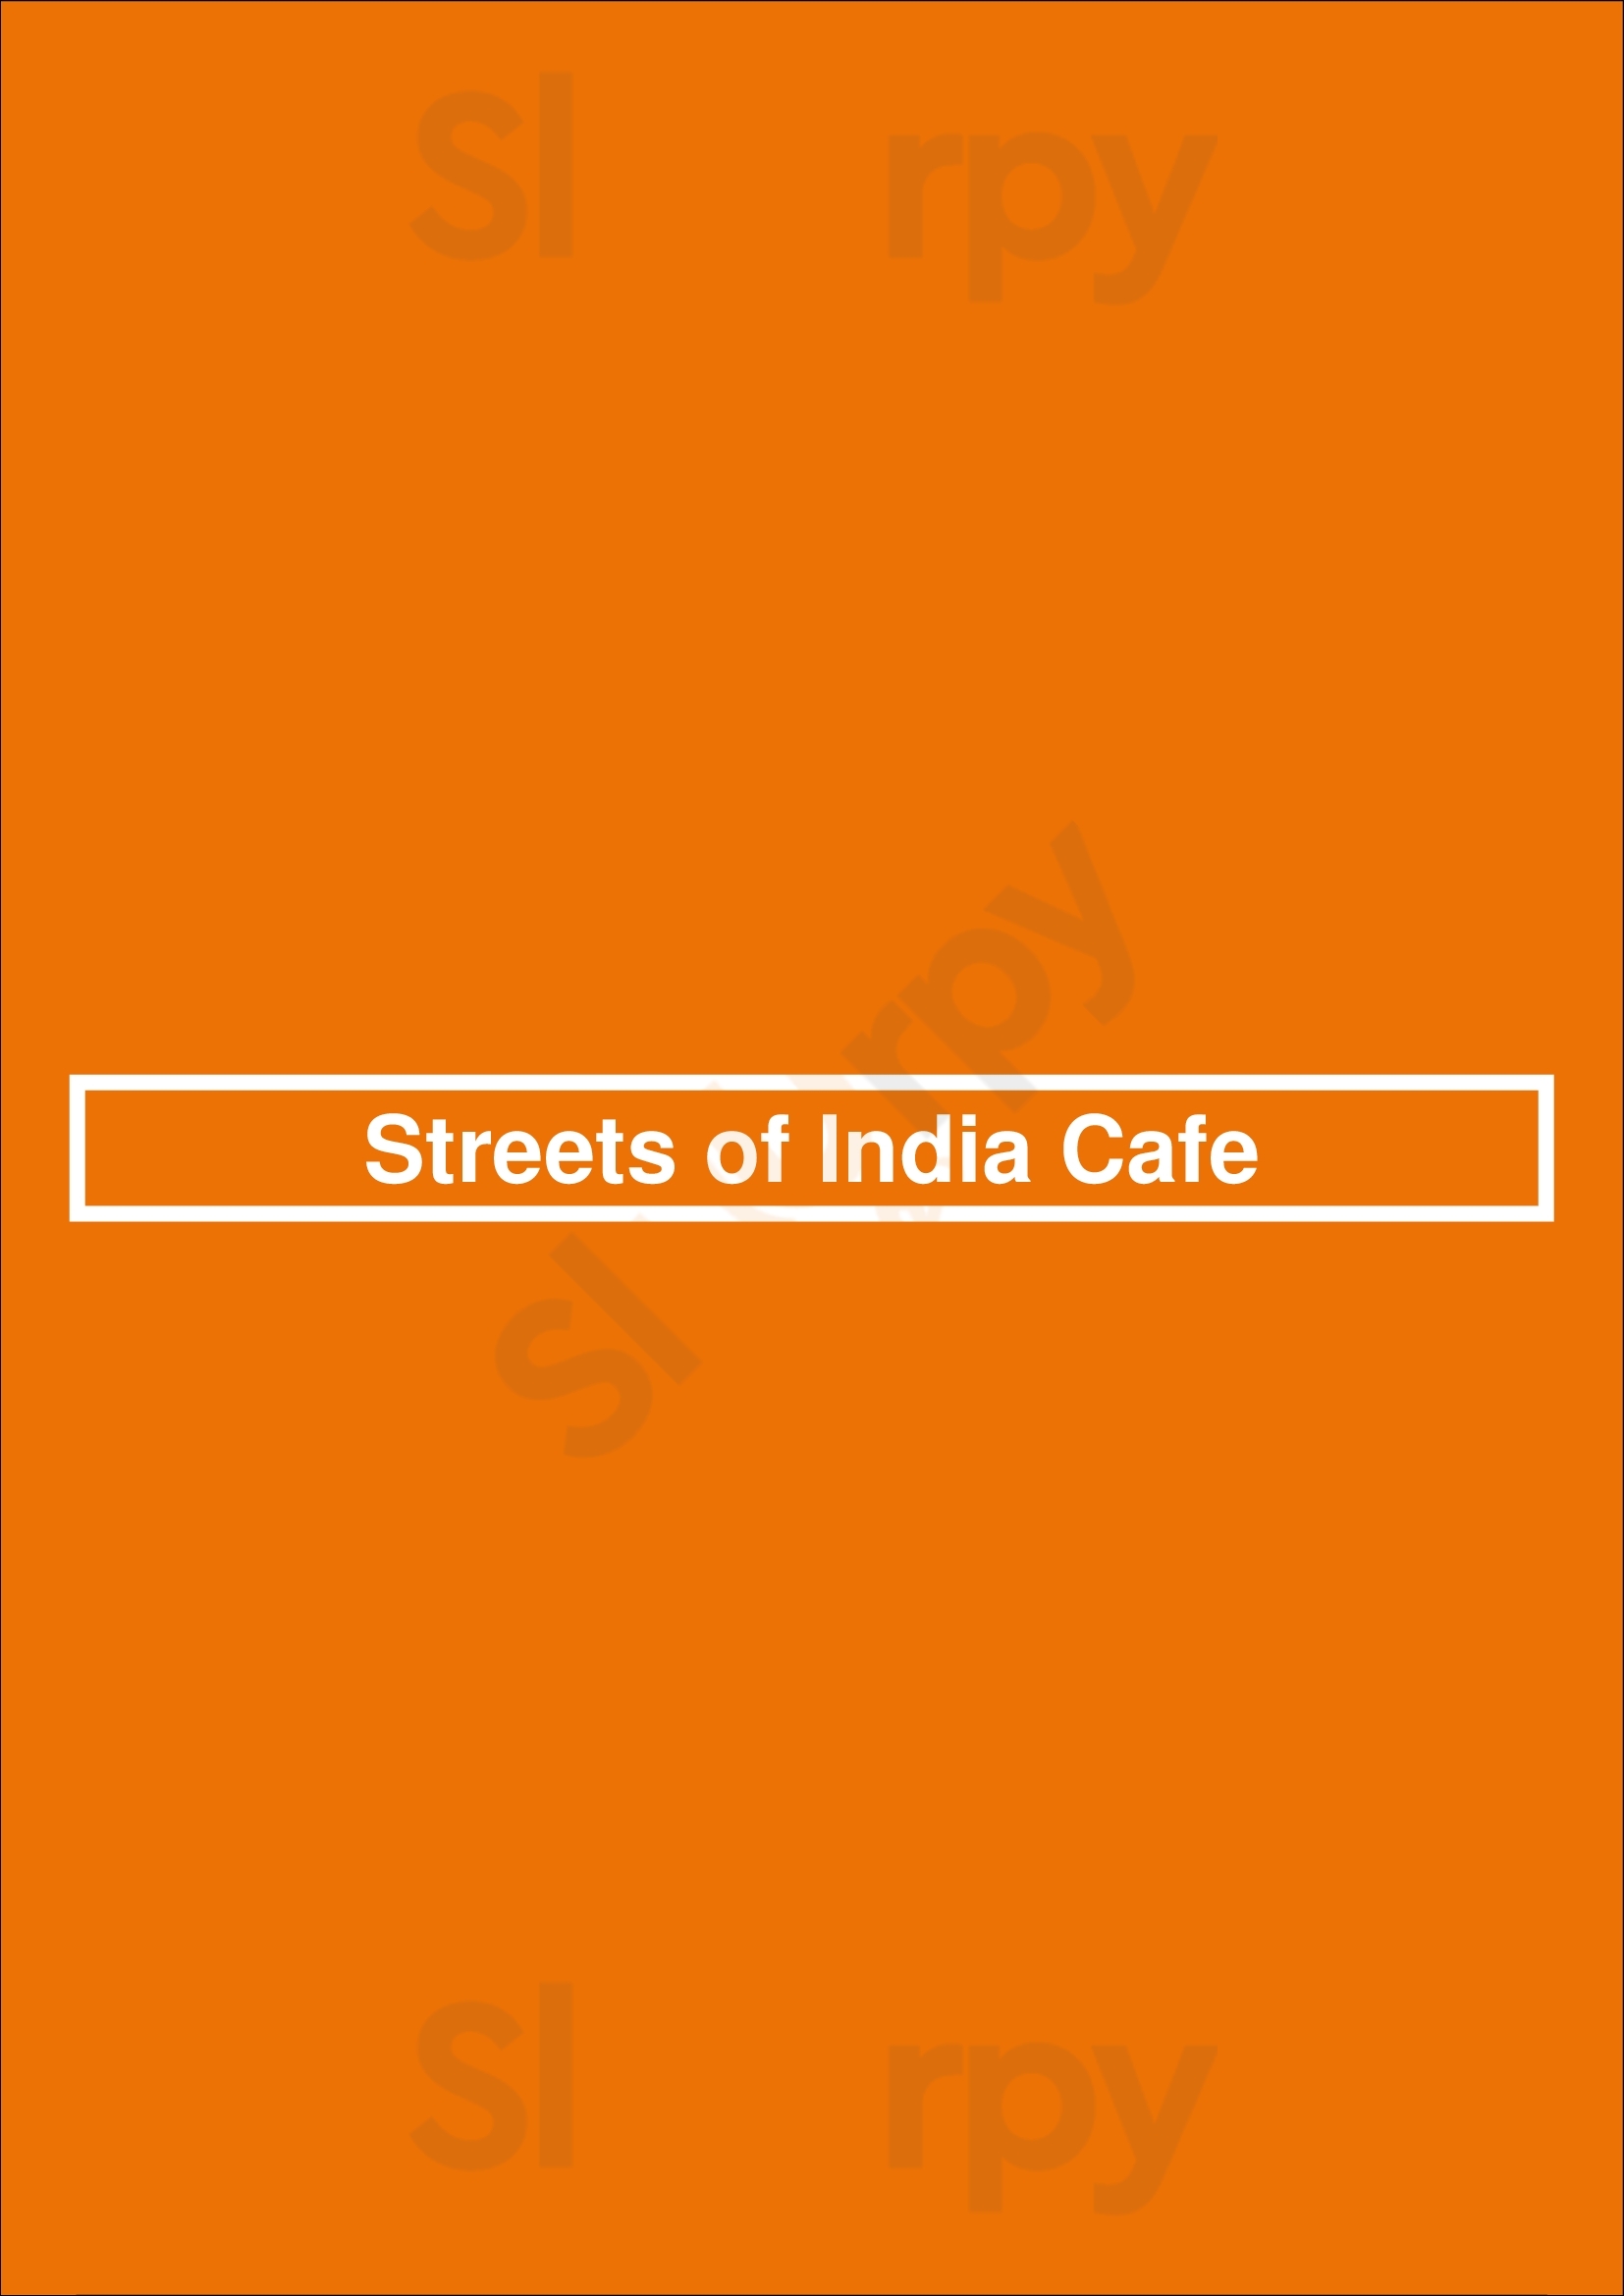 Streets Of India Cafe Los Angeles Menu - 1